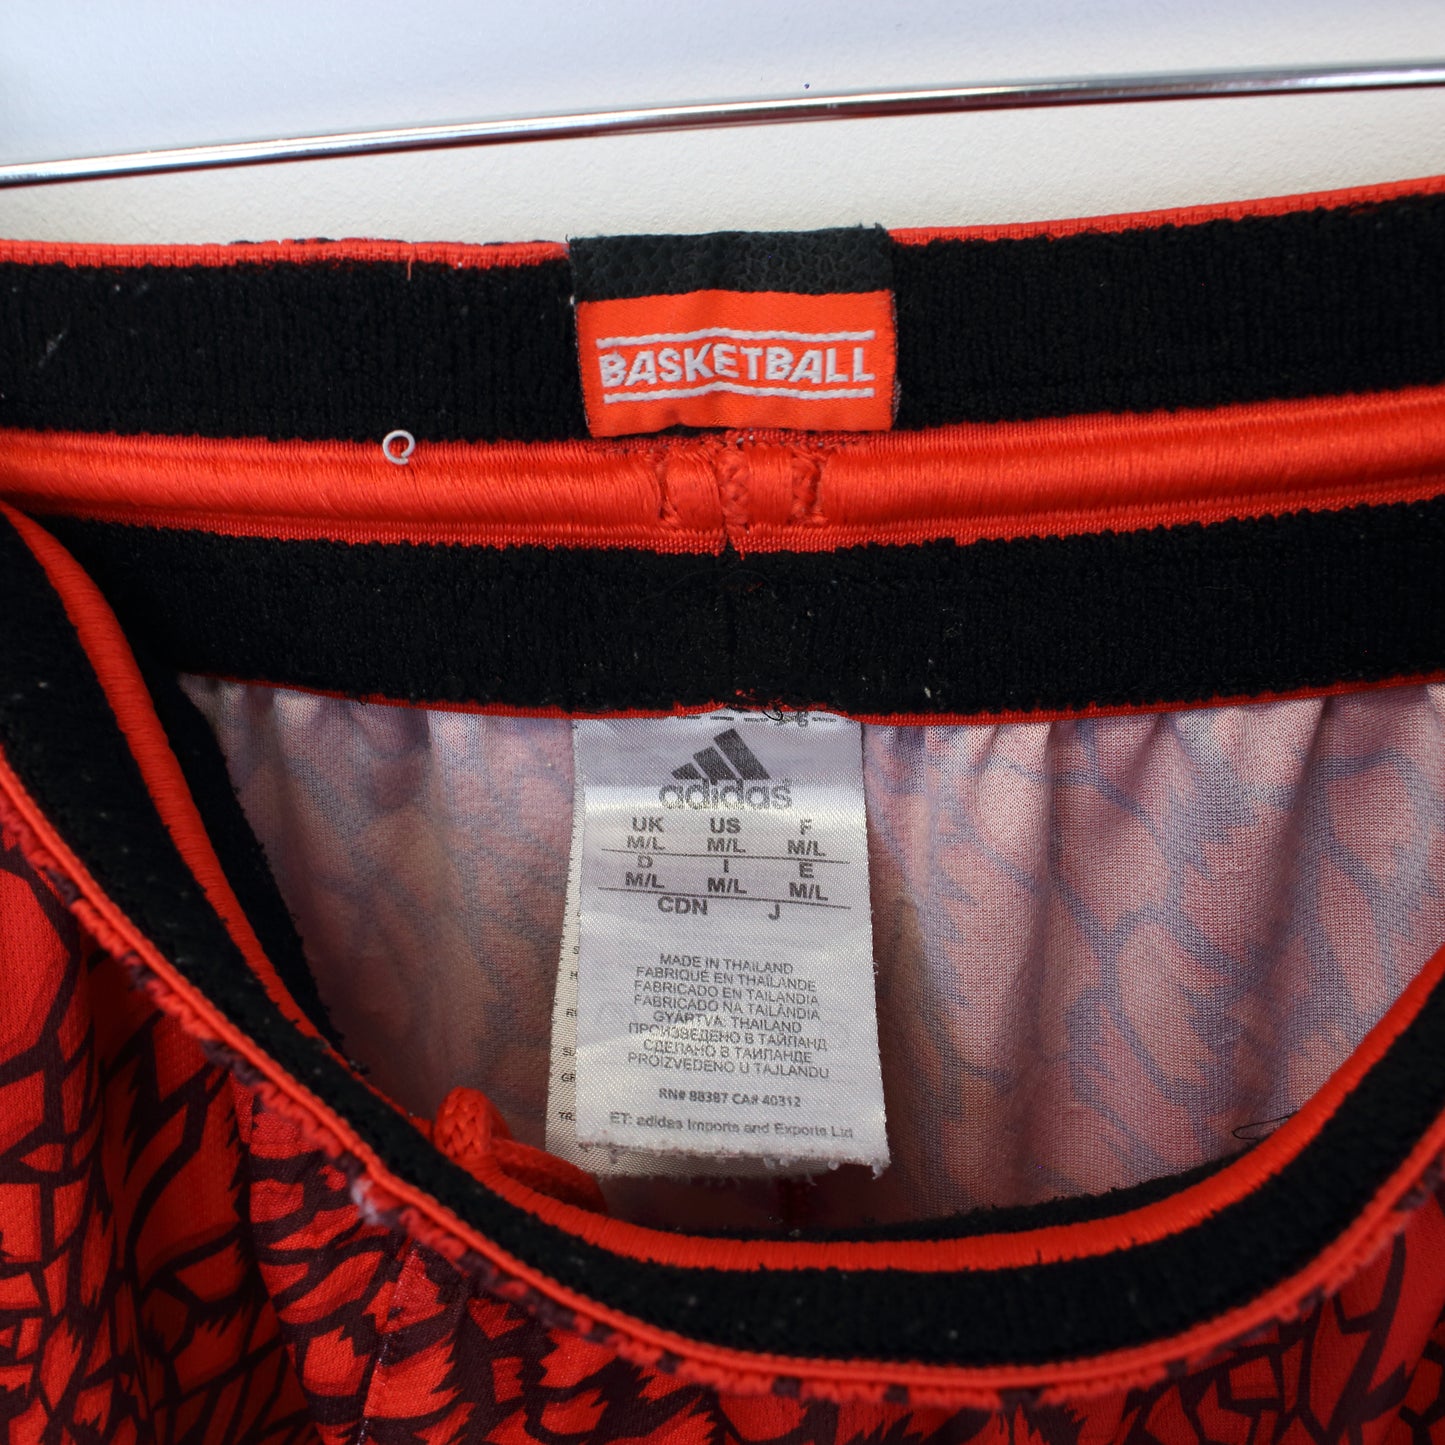 Vintage Adidas animal print shorts in red. Best fits M